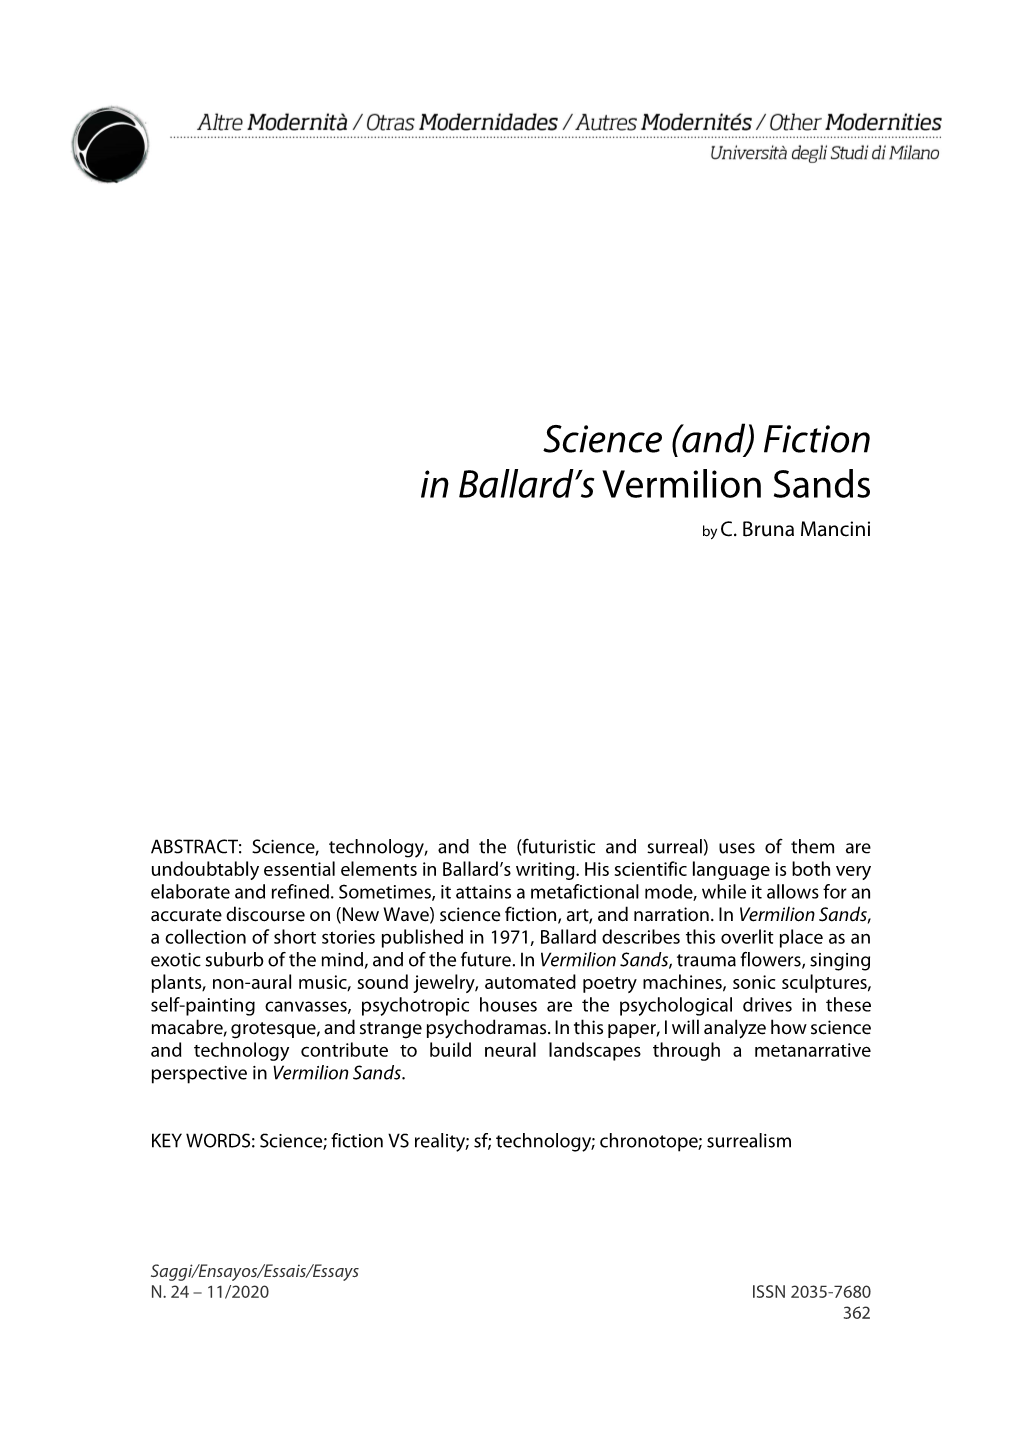 Science (And) Fiction in Ballard's Vermilion Sands